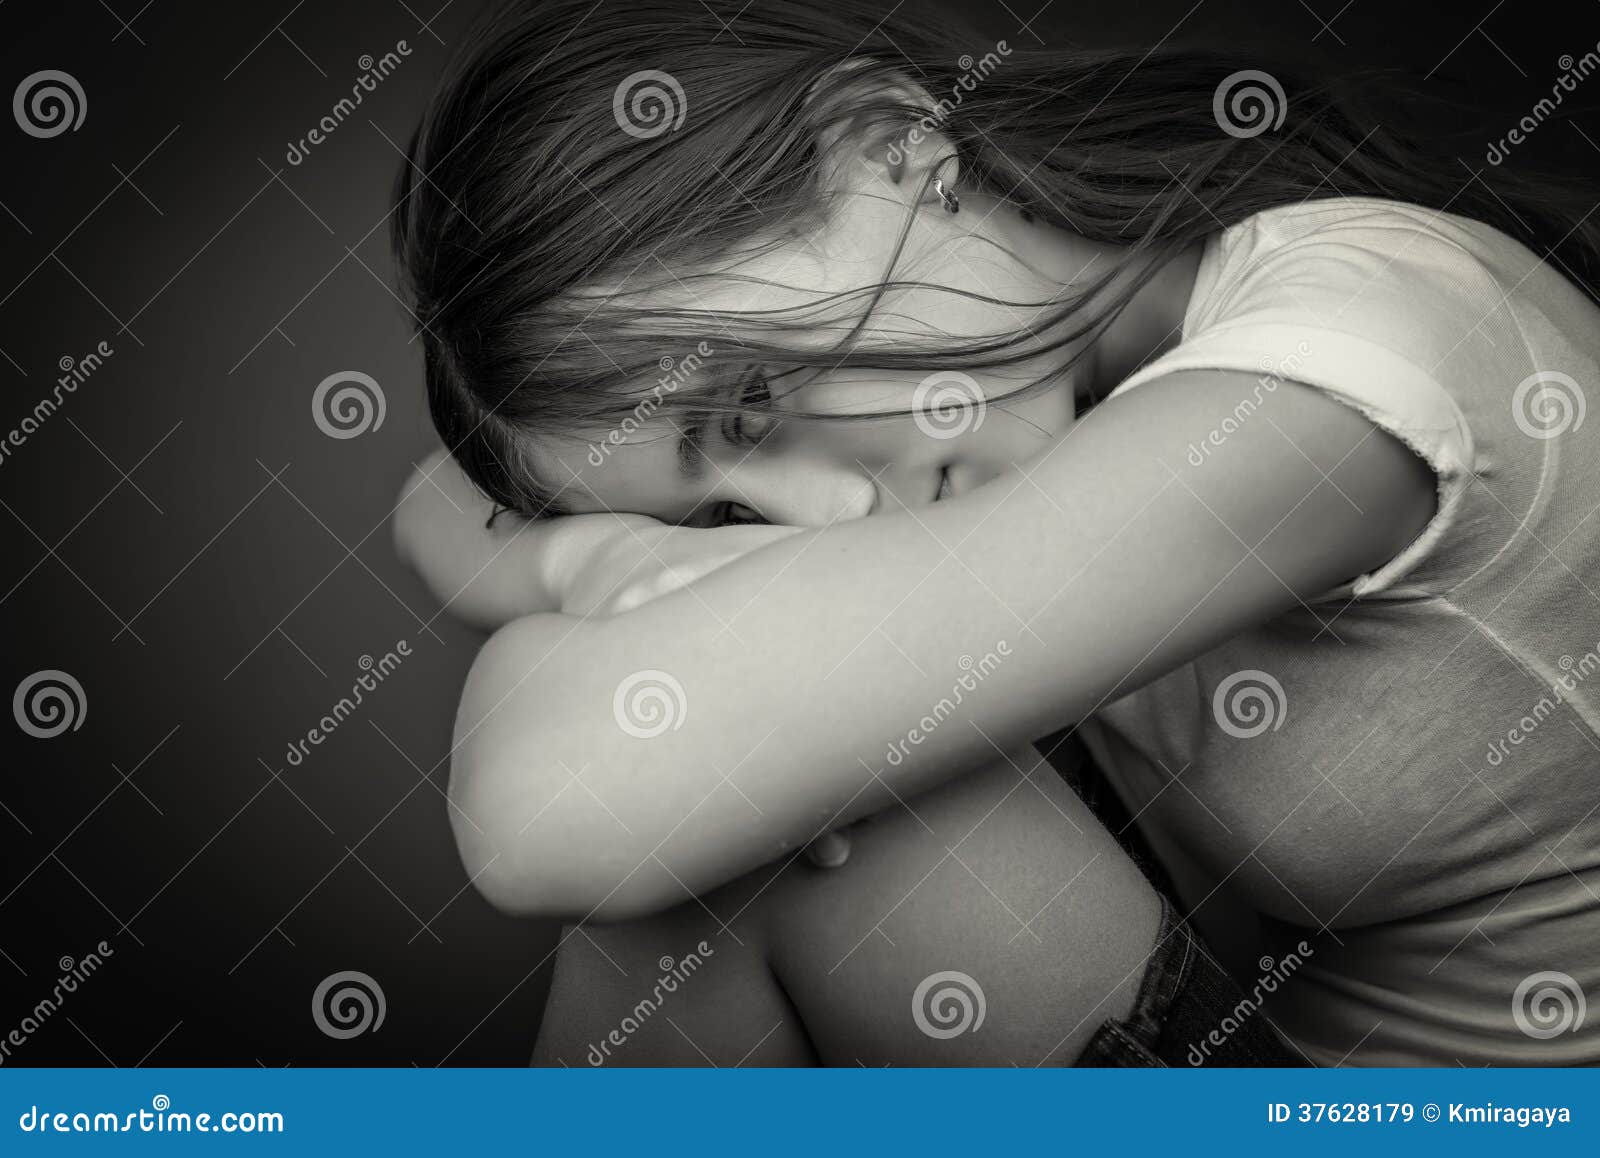 Black and White Image of a Sad and Lonely Girl Stock Image - Image ...